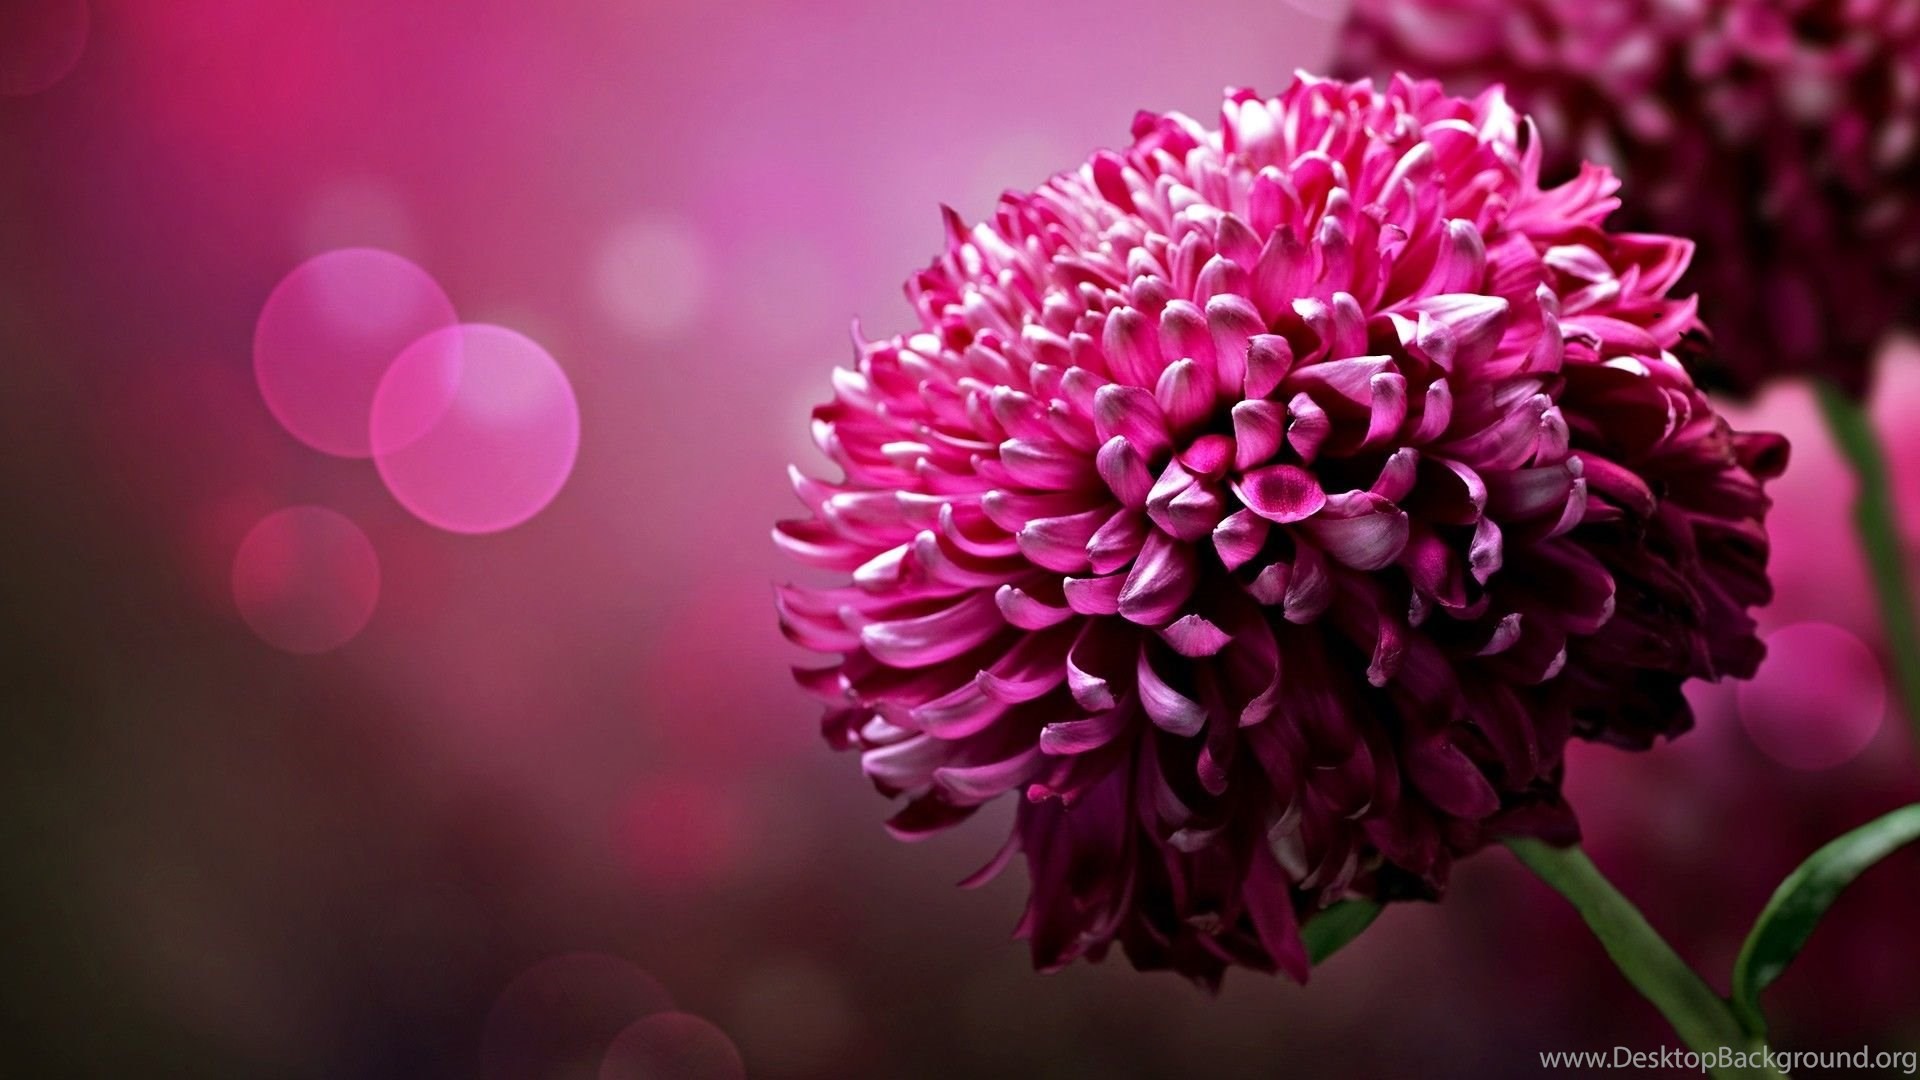 1920x1080 Hd Wallpapers Beautiful Flowers Backgrounds Wallpapers For Your .